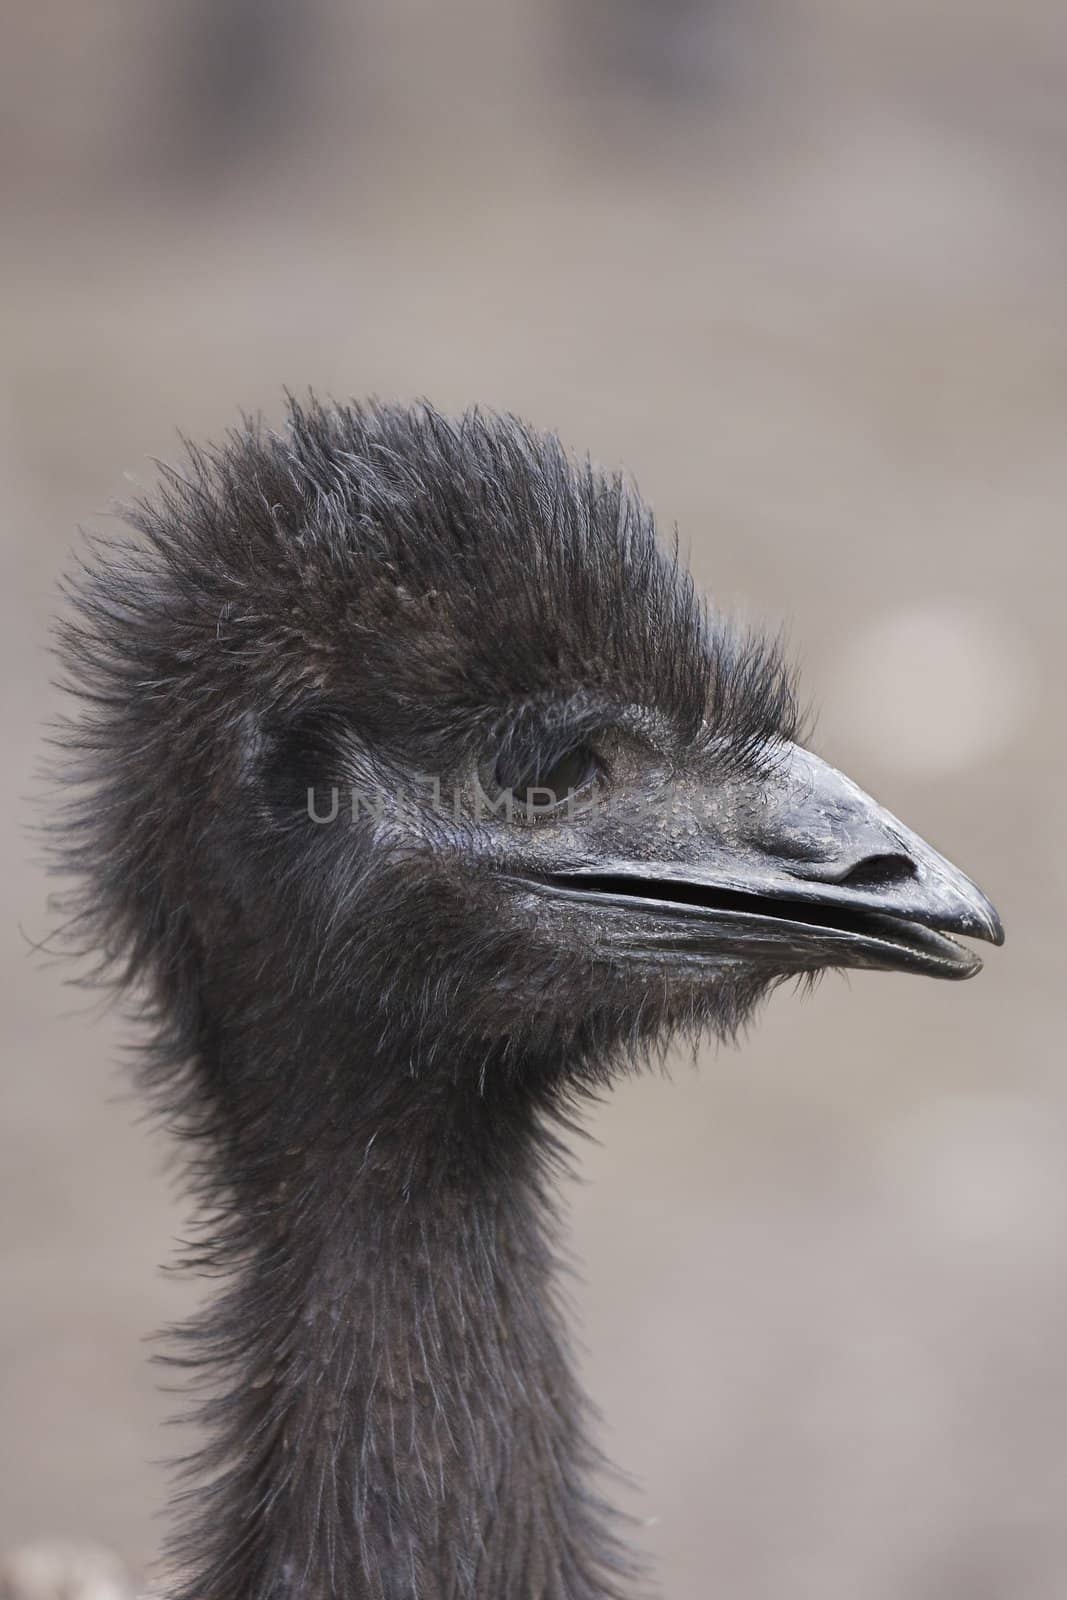 A portrait of a young Emu